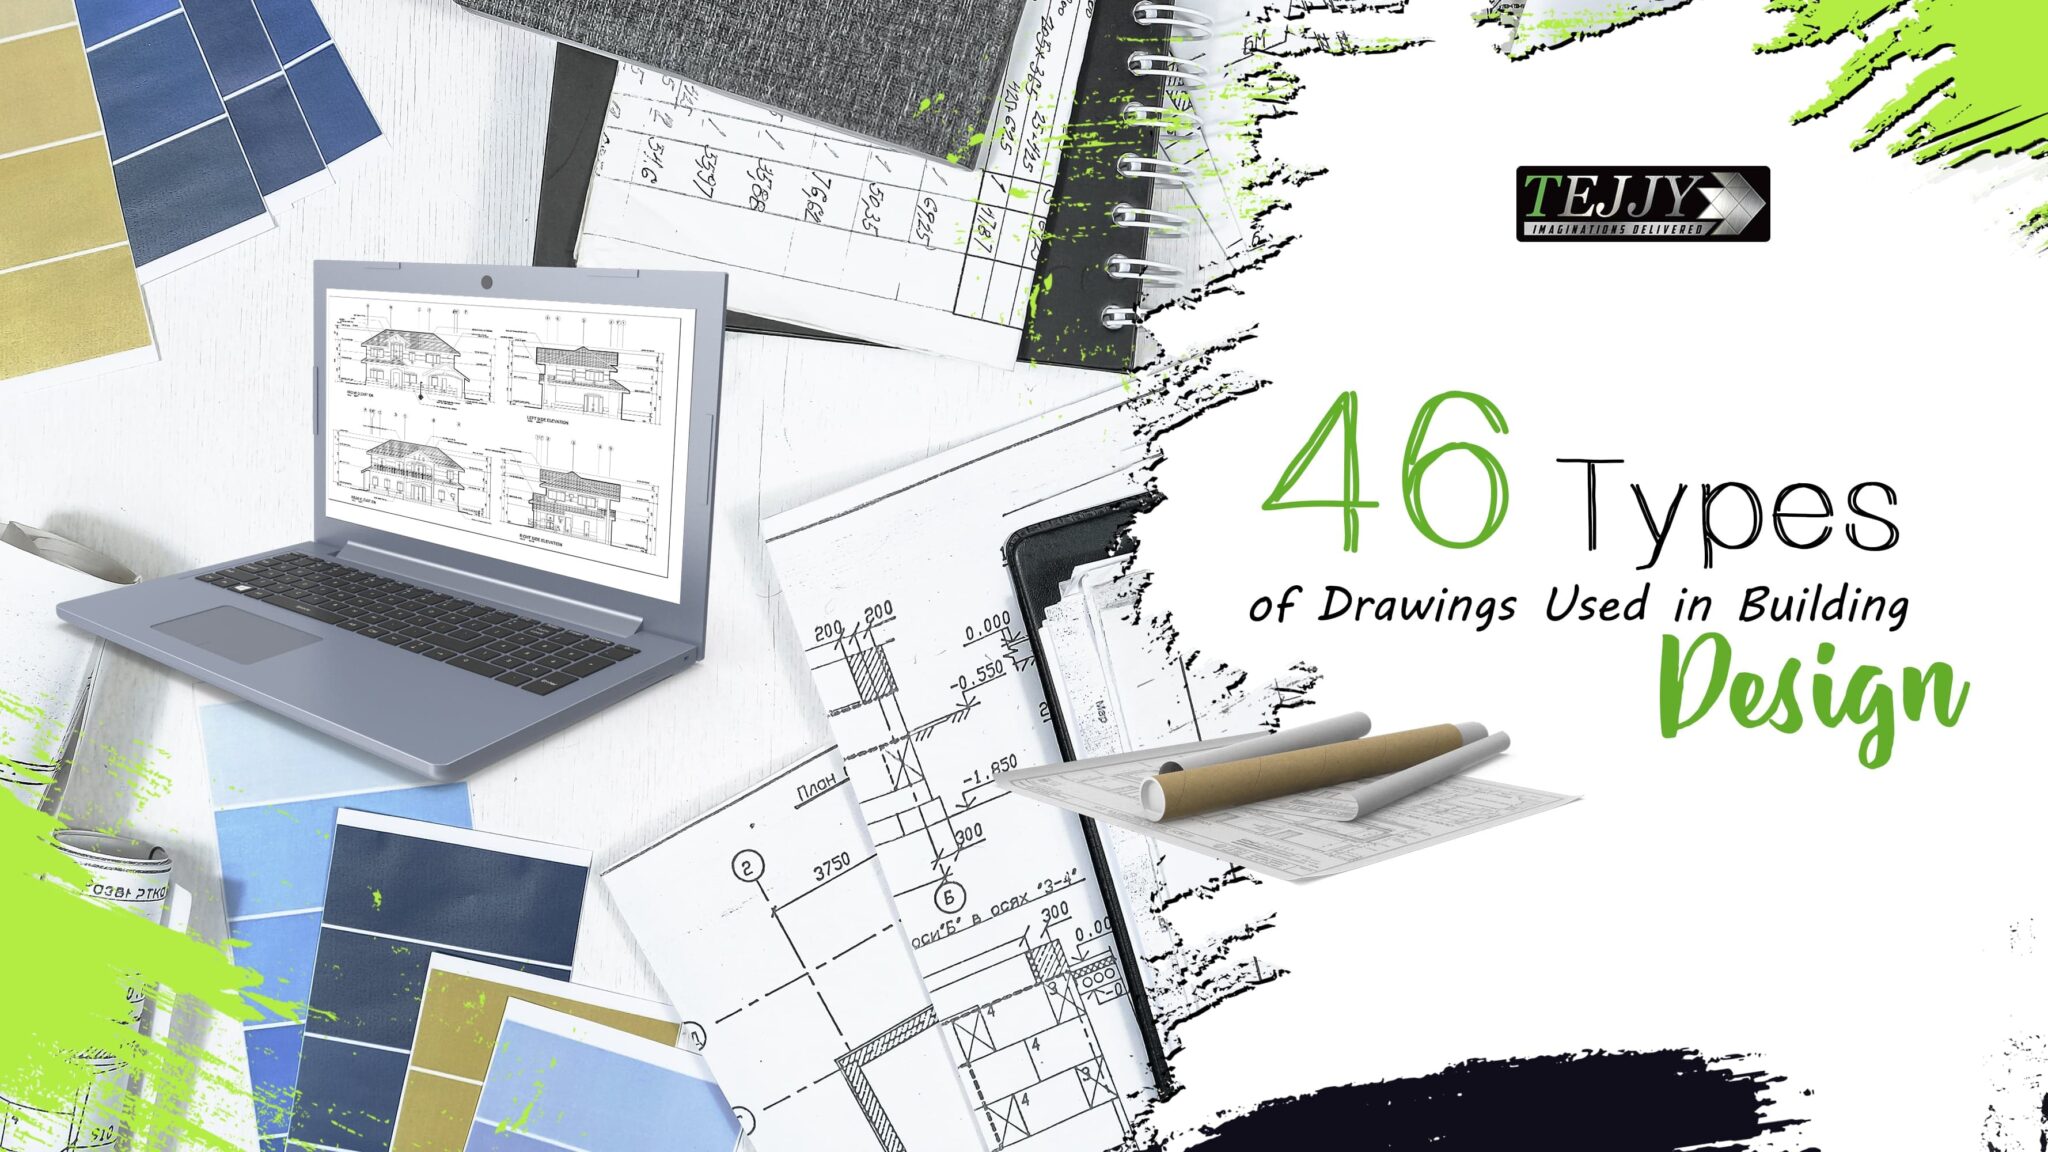 46 Types of Drawings Used in Building